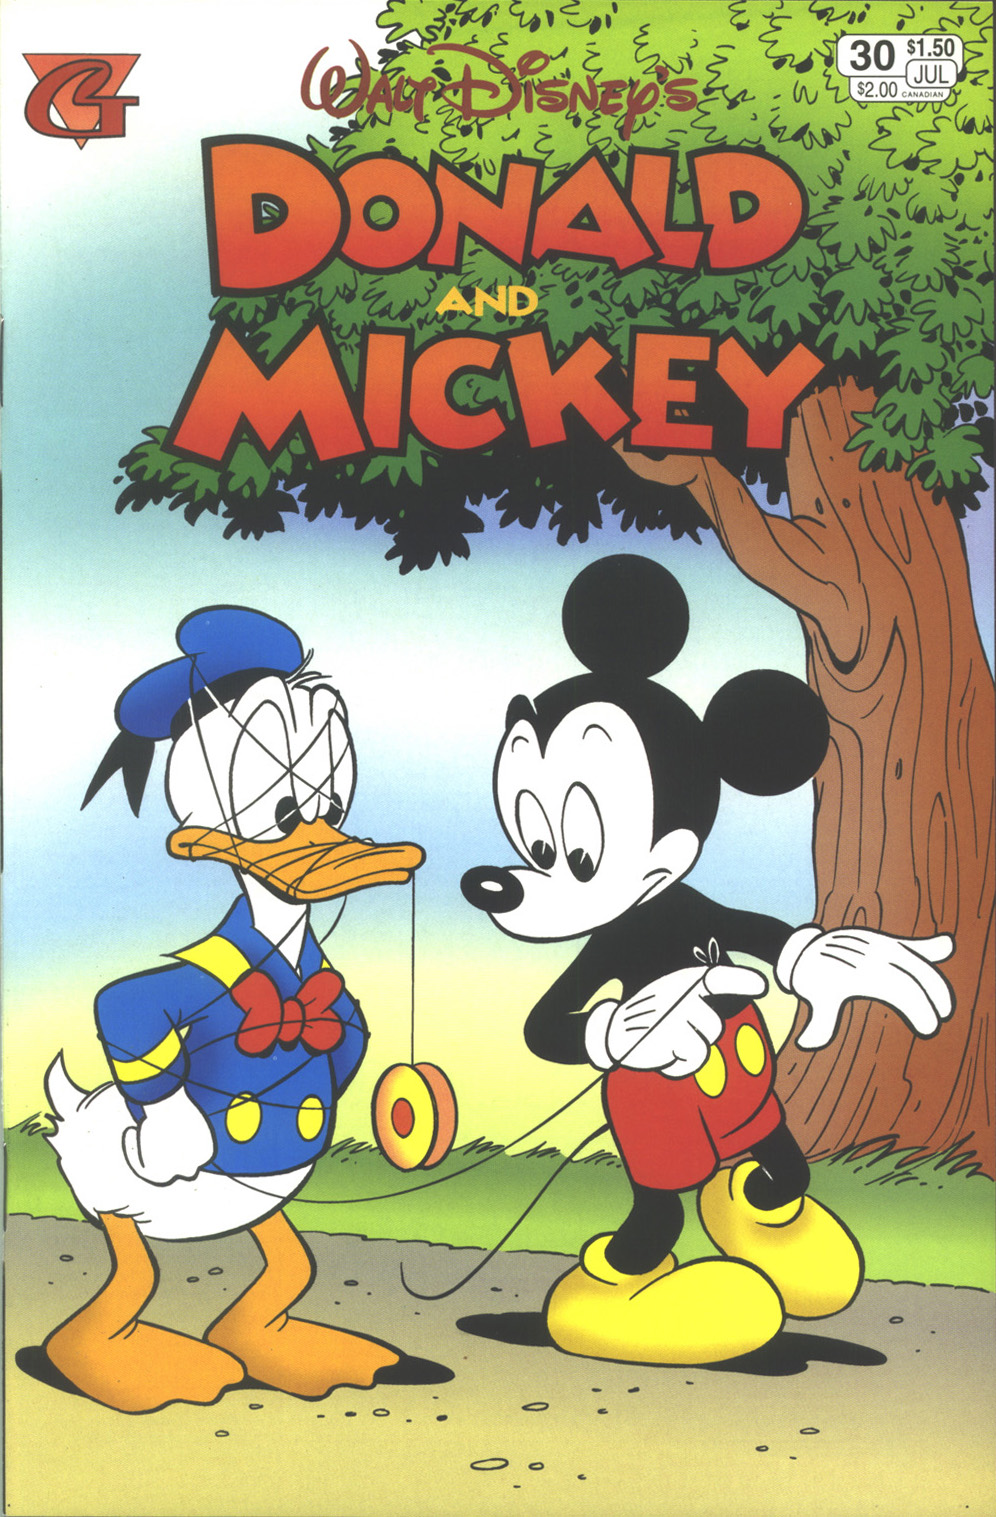 Read online Walt Disney's Donald and Mickey comic -  Issue #30 - 1